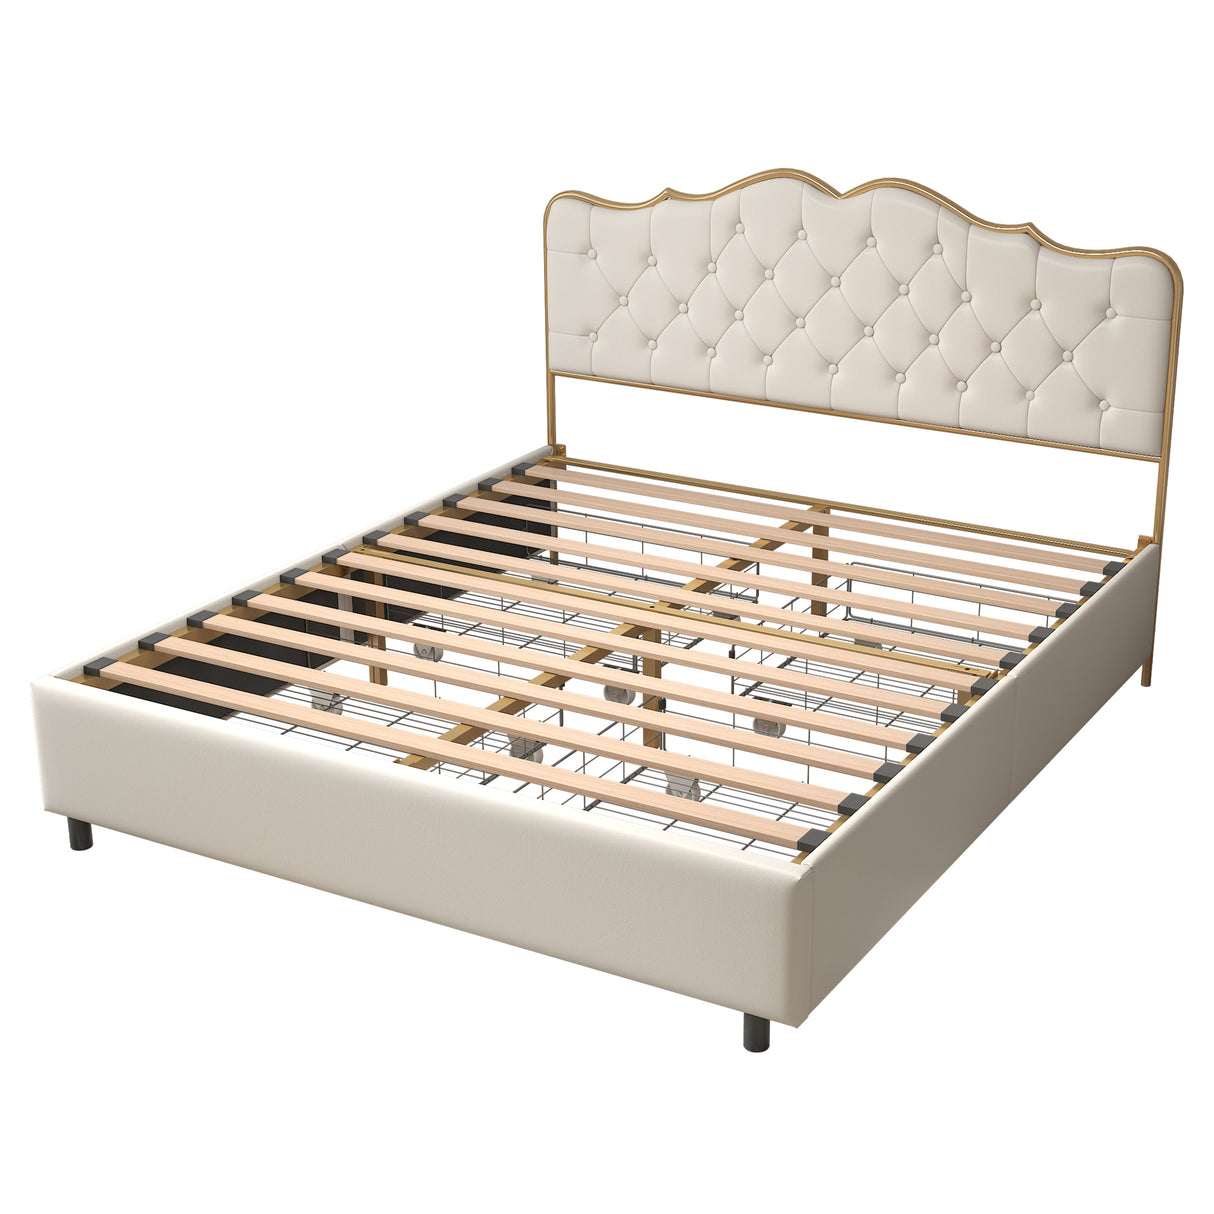 Classic buckle backrest, metal frame, solid wood ribs, with four storage drawers, sponge soft bag, comfortable and elegant atmosphere, white, Qeen-size, sleeping bed - Home Elegance USA